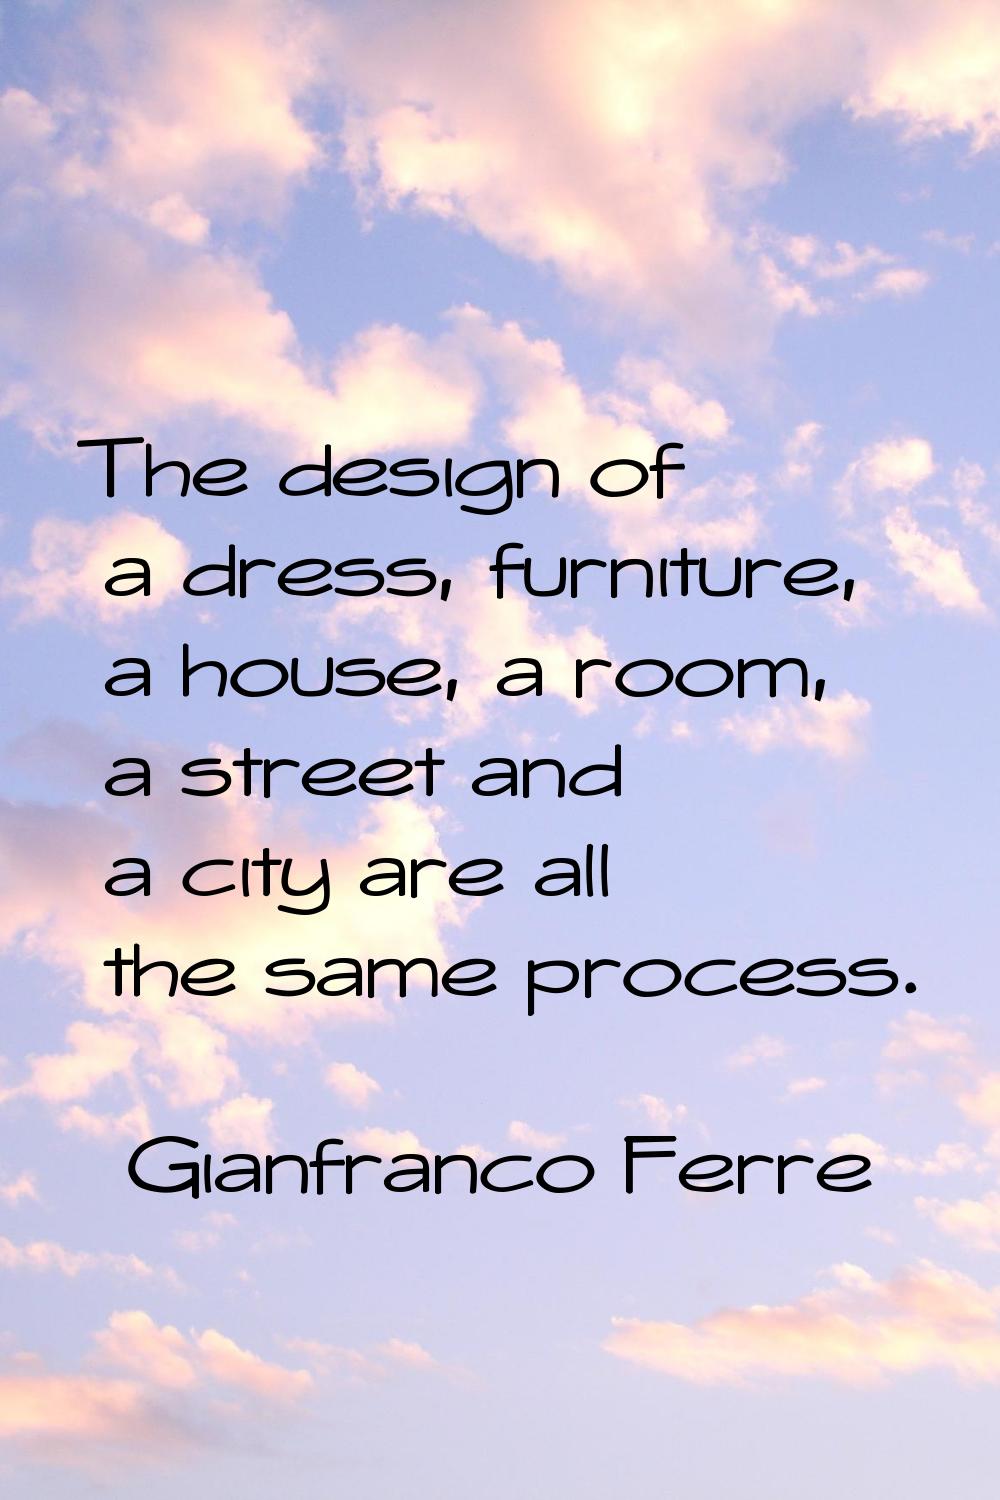 The design of a dress, furniture, a house, a room, a street and a city are all the same process.